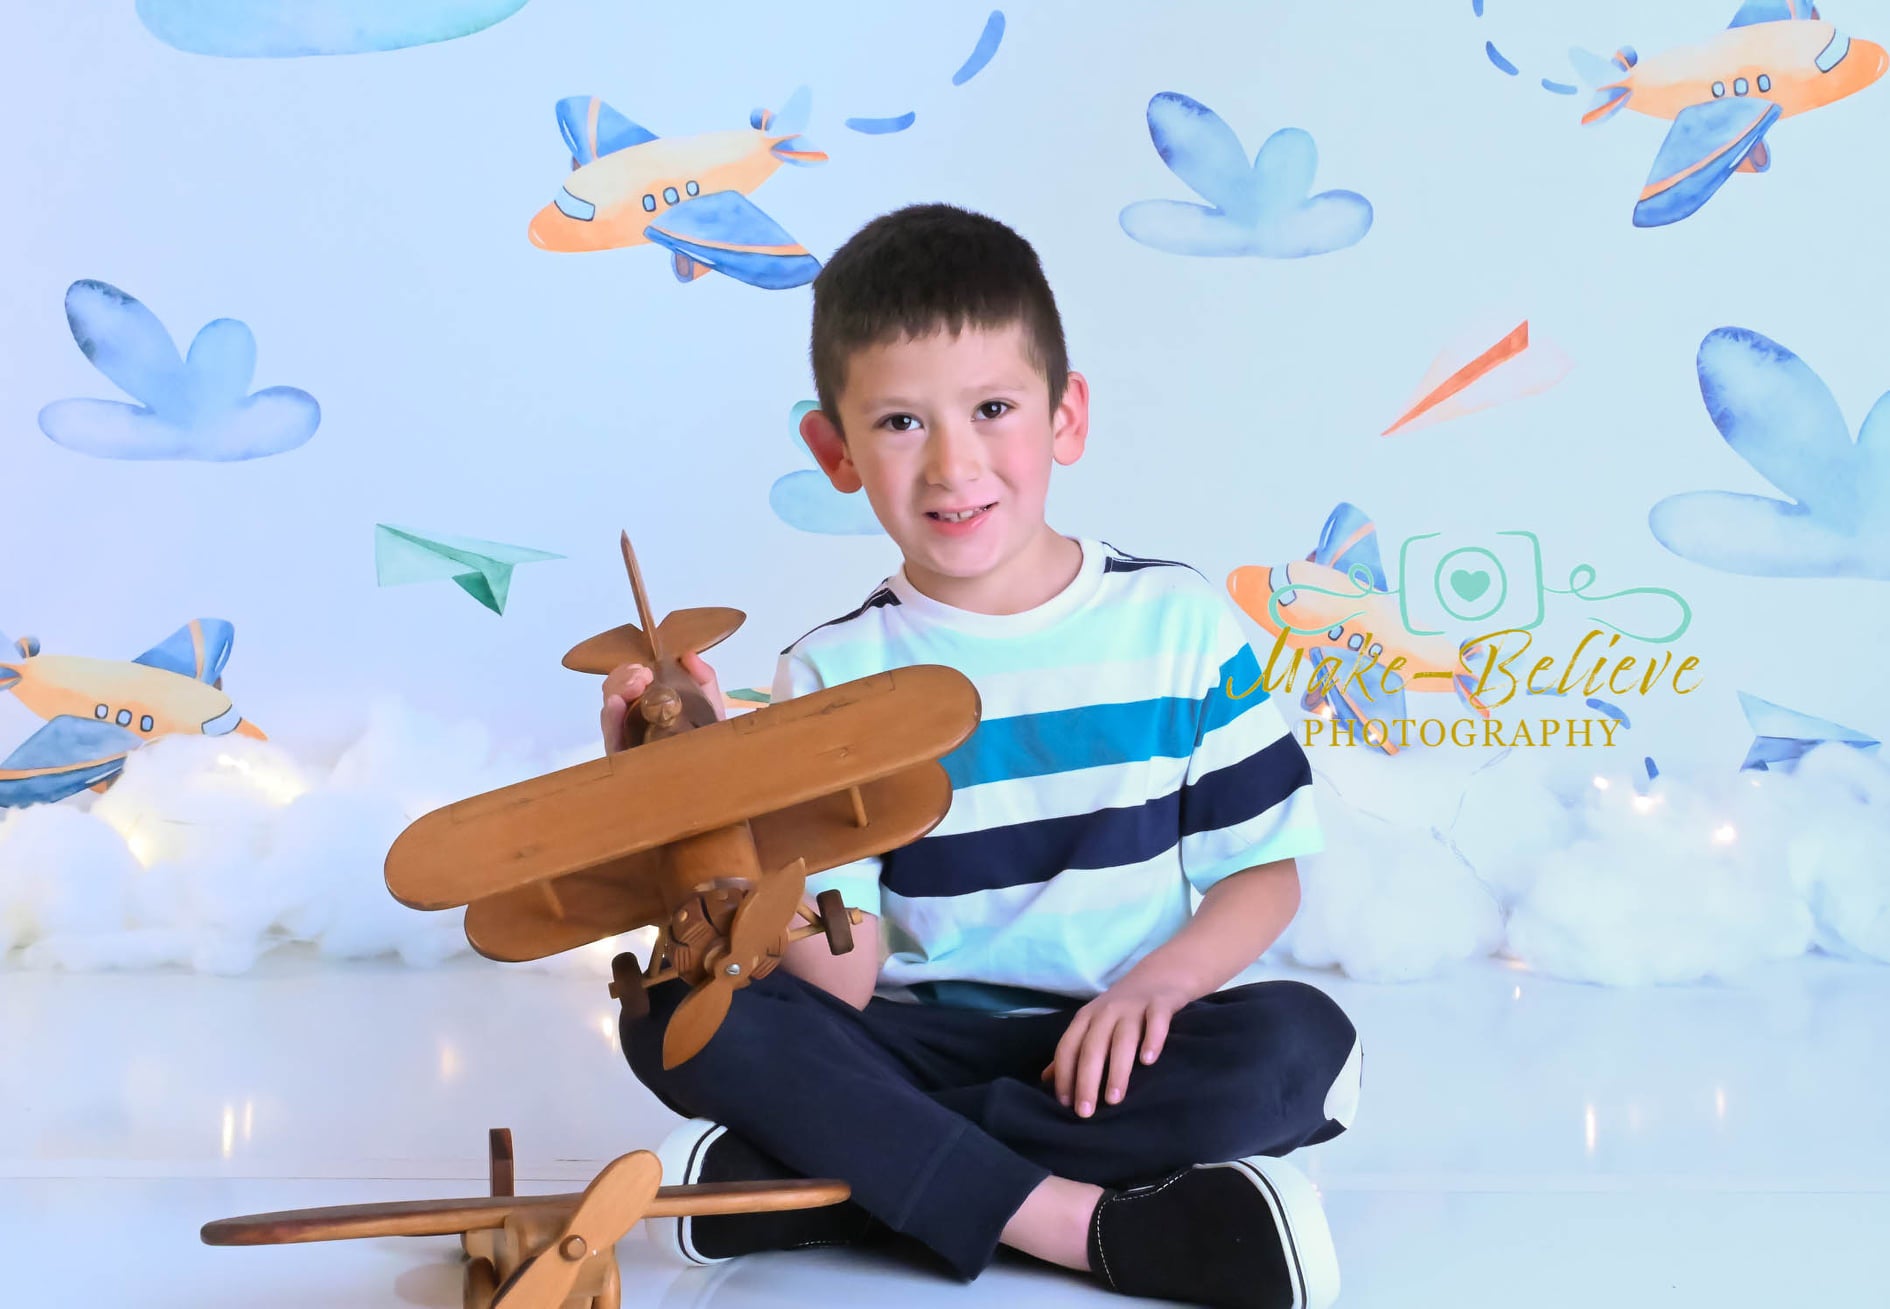 Kate Airplane Backdrop Designed by Megan Leigh Photography